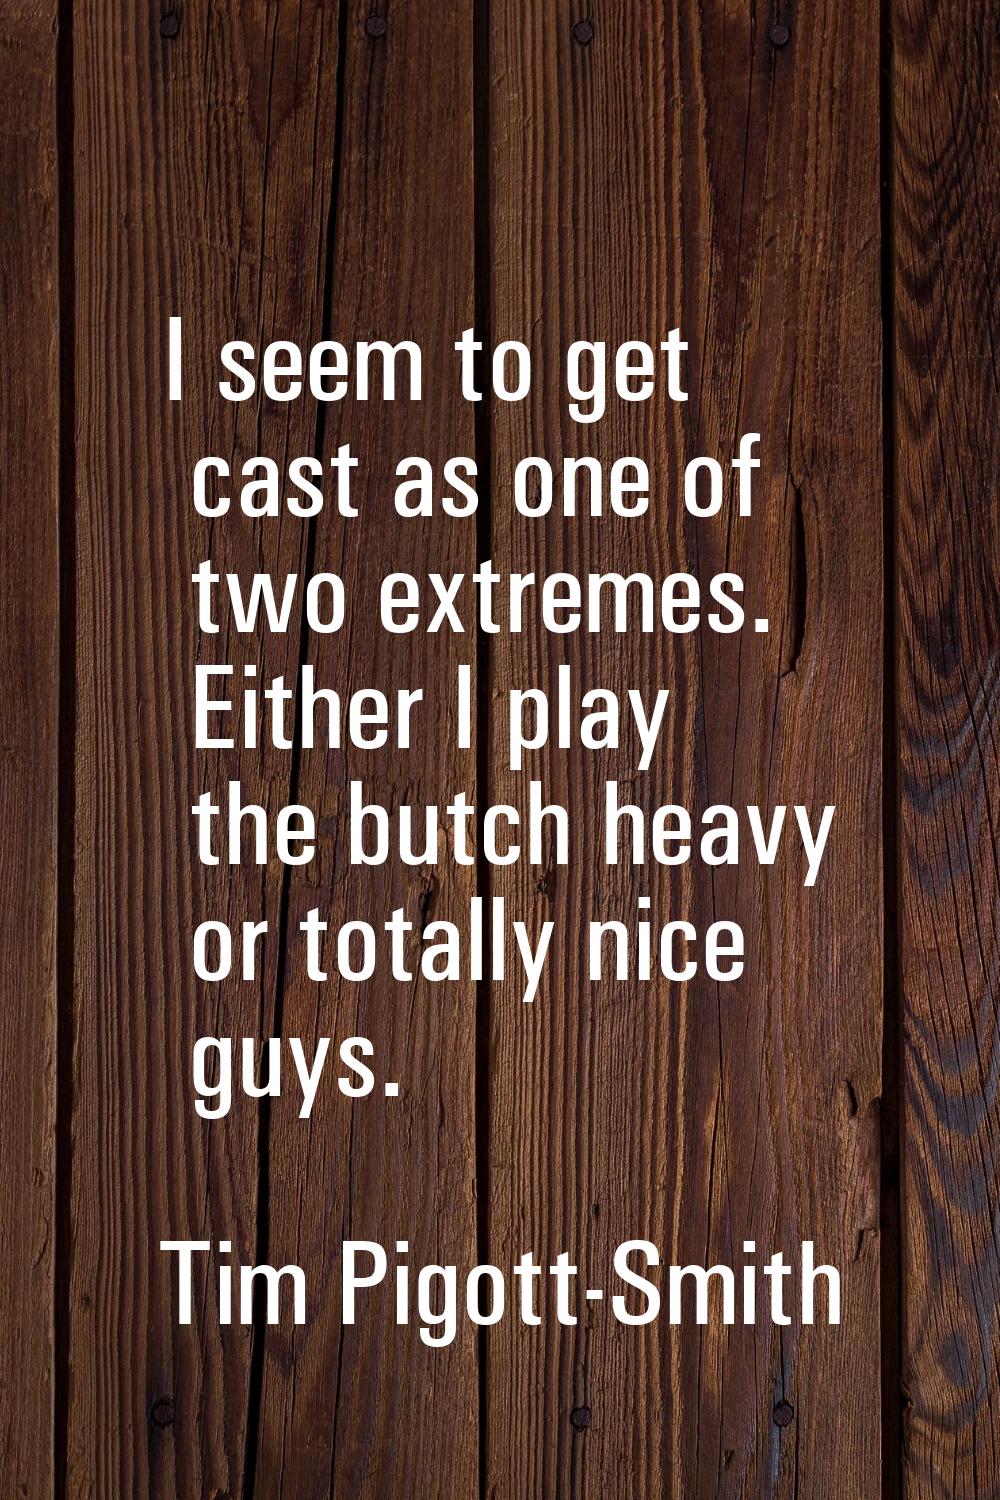 I seem to get cast as one of two extremes. Either I play the butch heavy or totally nice guys.